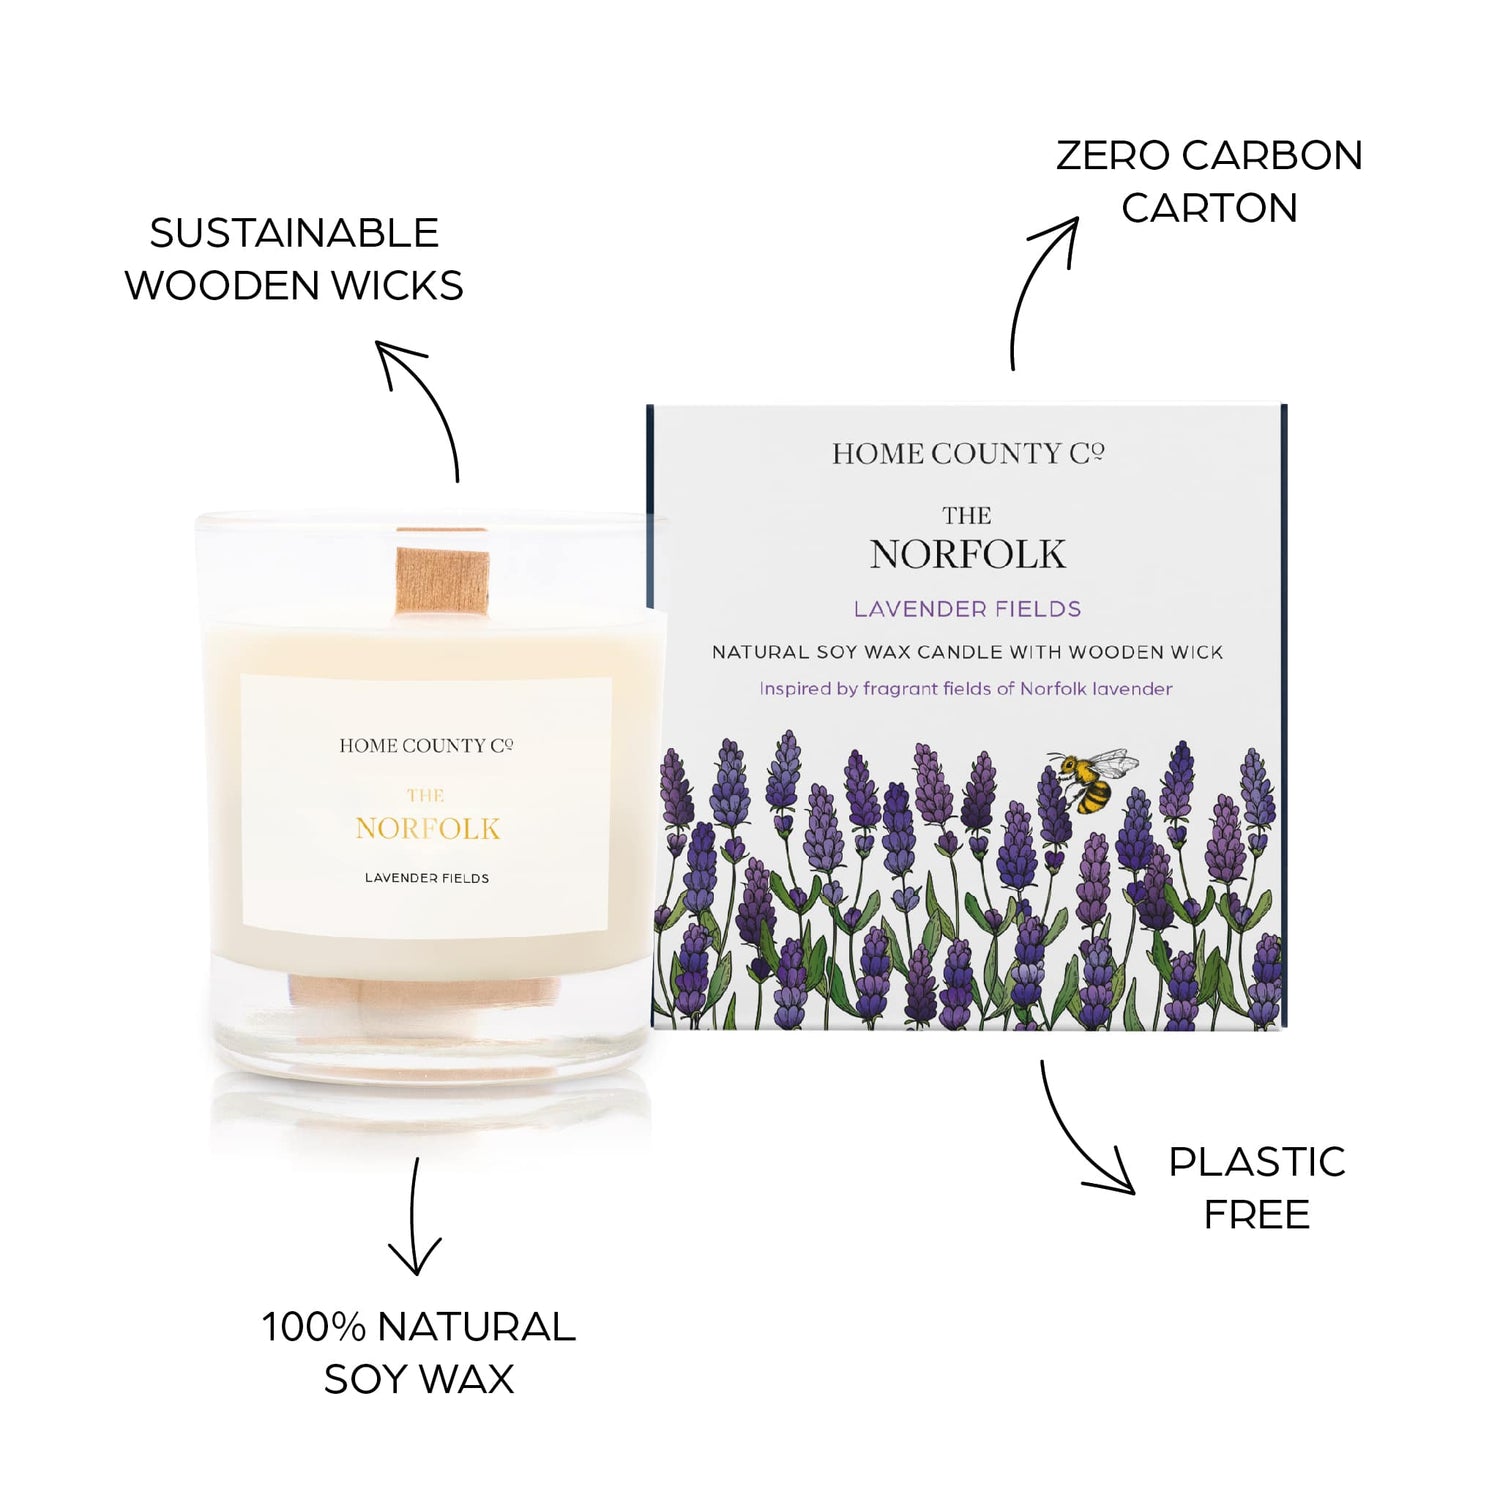 Sustainable candle credentials are shown around the lavender scented candle image - sustainable wooden wicks, zero carbon carton, 100% natural soy wax, plastic free